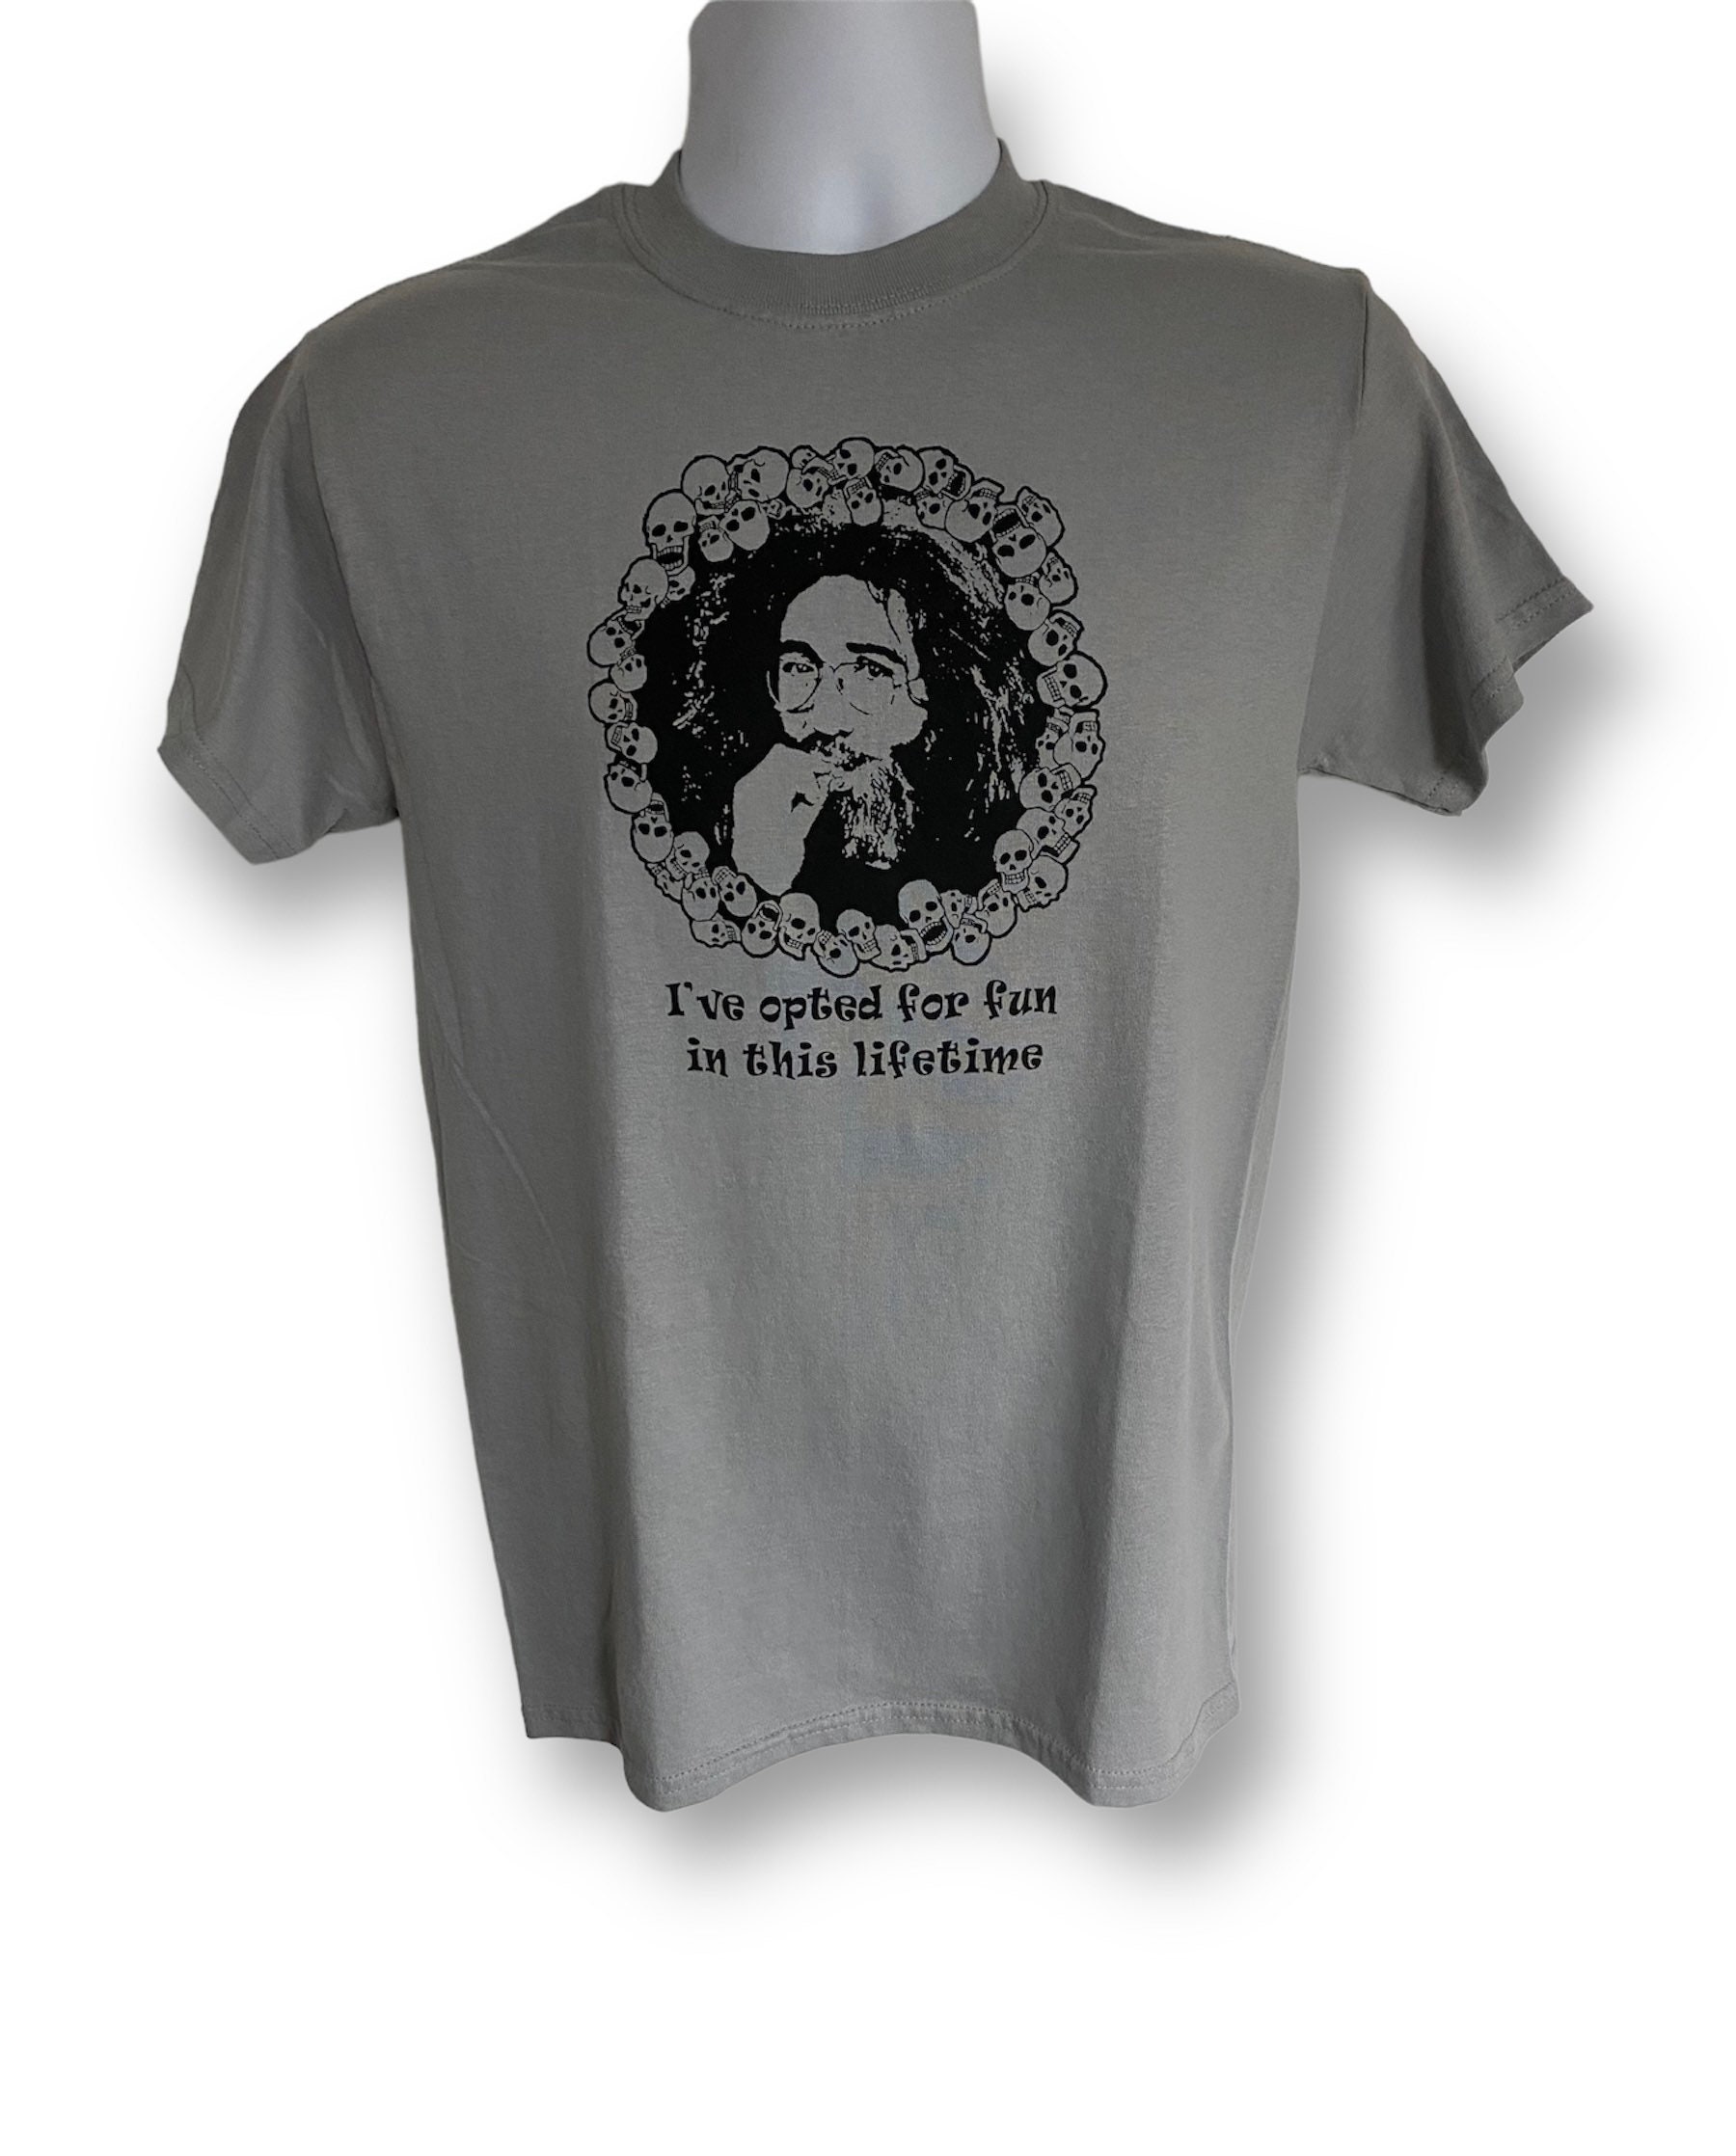 Jerry Garcia Lifetime Opted This Israel Shirt Fun Etsy - ive for in T